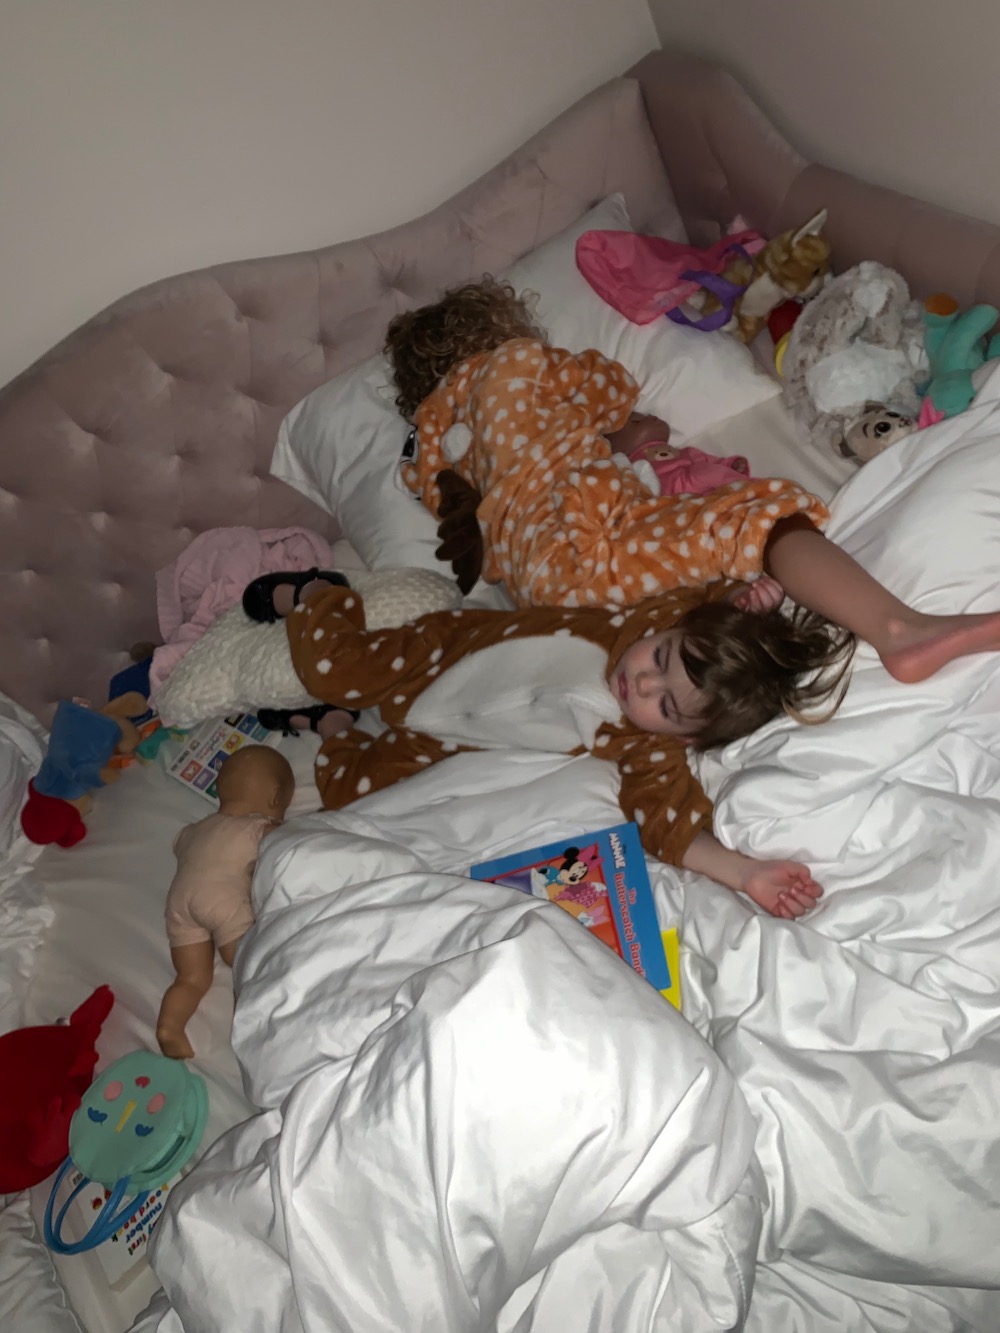 Toddlers-Sharing-a-Room-1 Our Girls Share a Room - and a Full Sized Bed